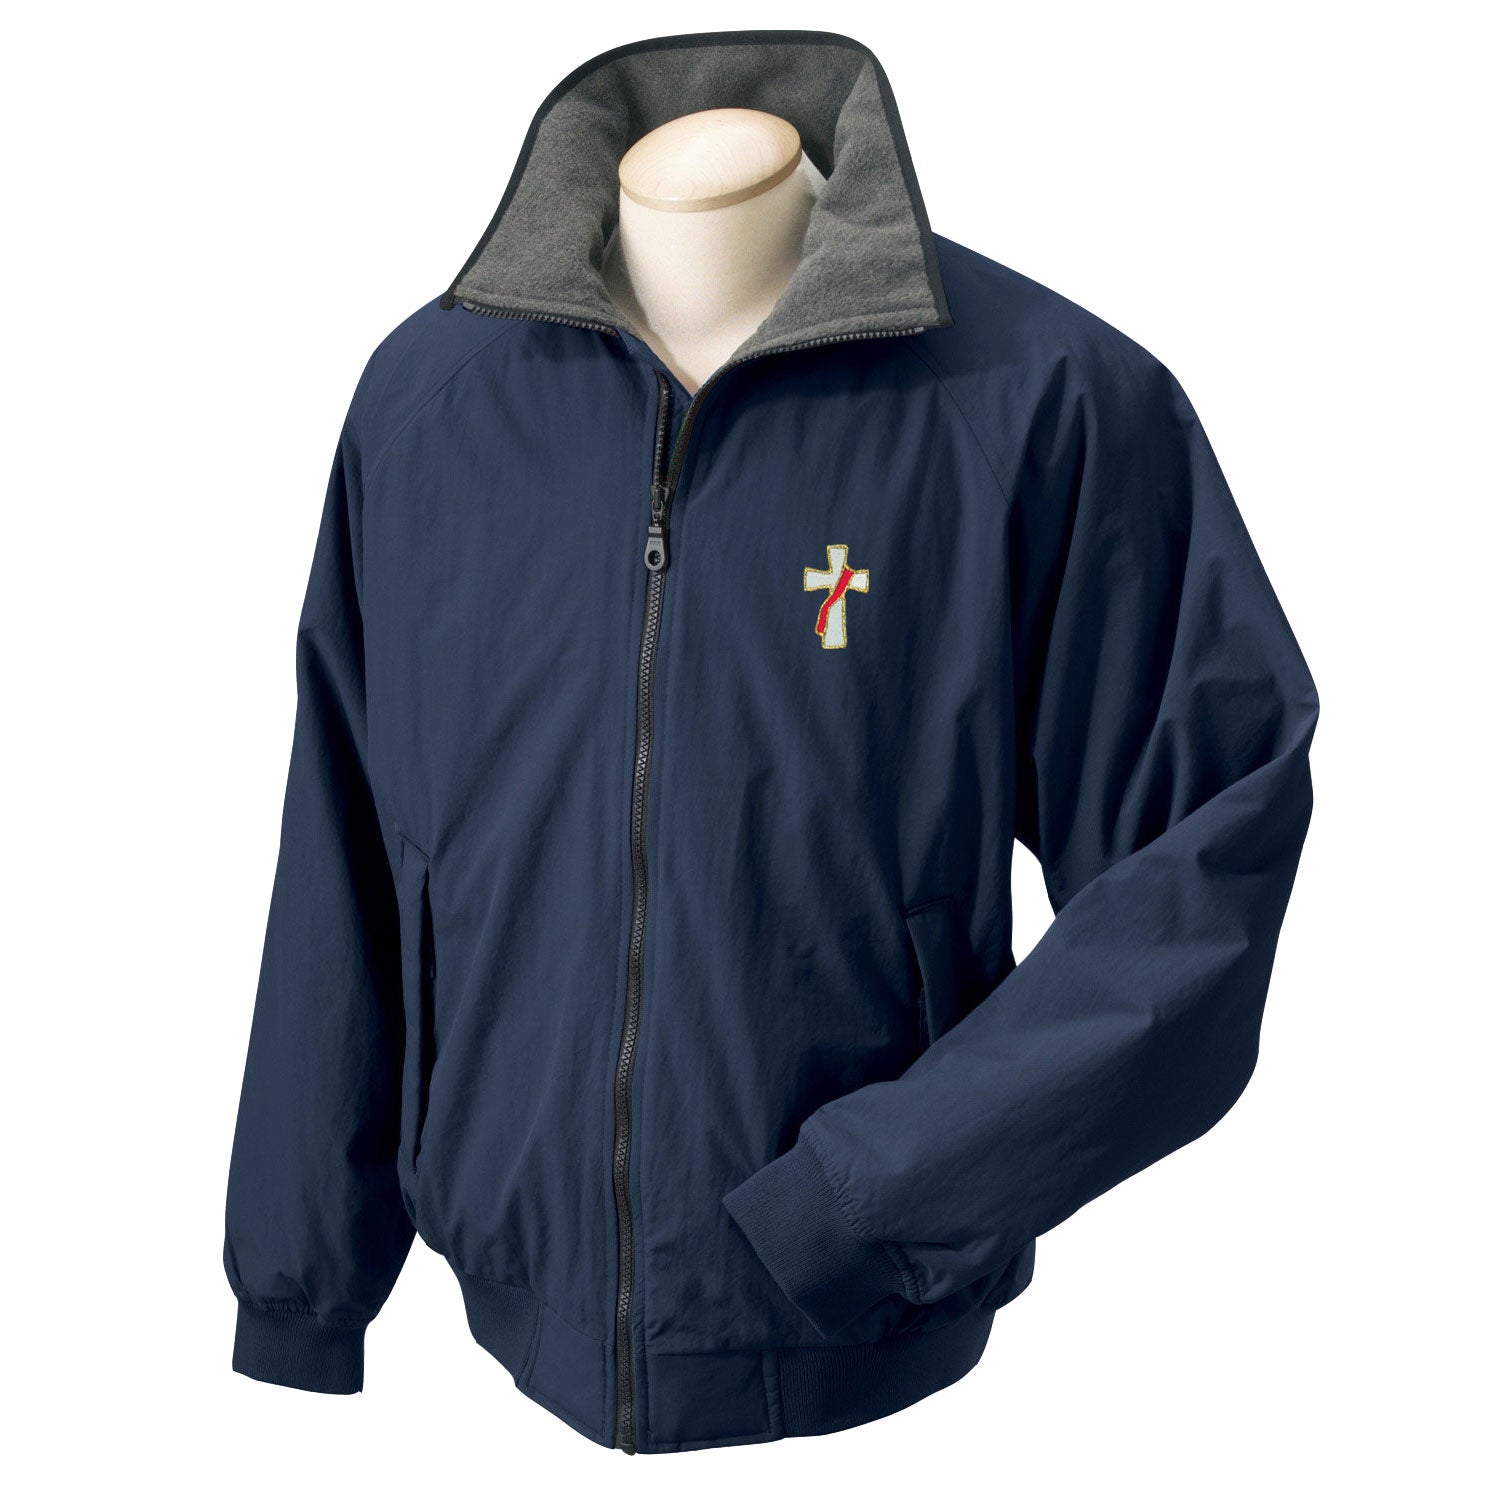 Fleece Lined Jacket Embroidered with Deacon Cross